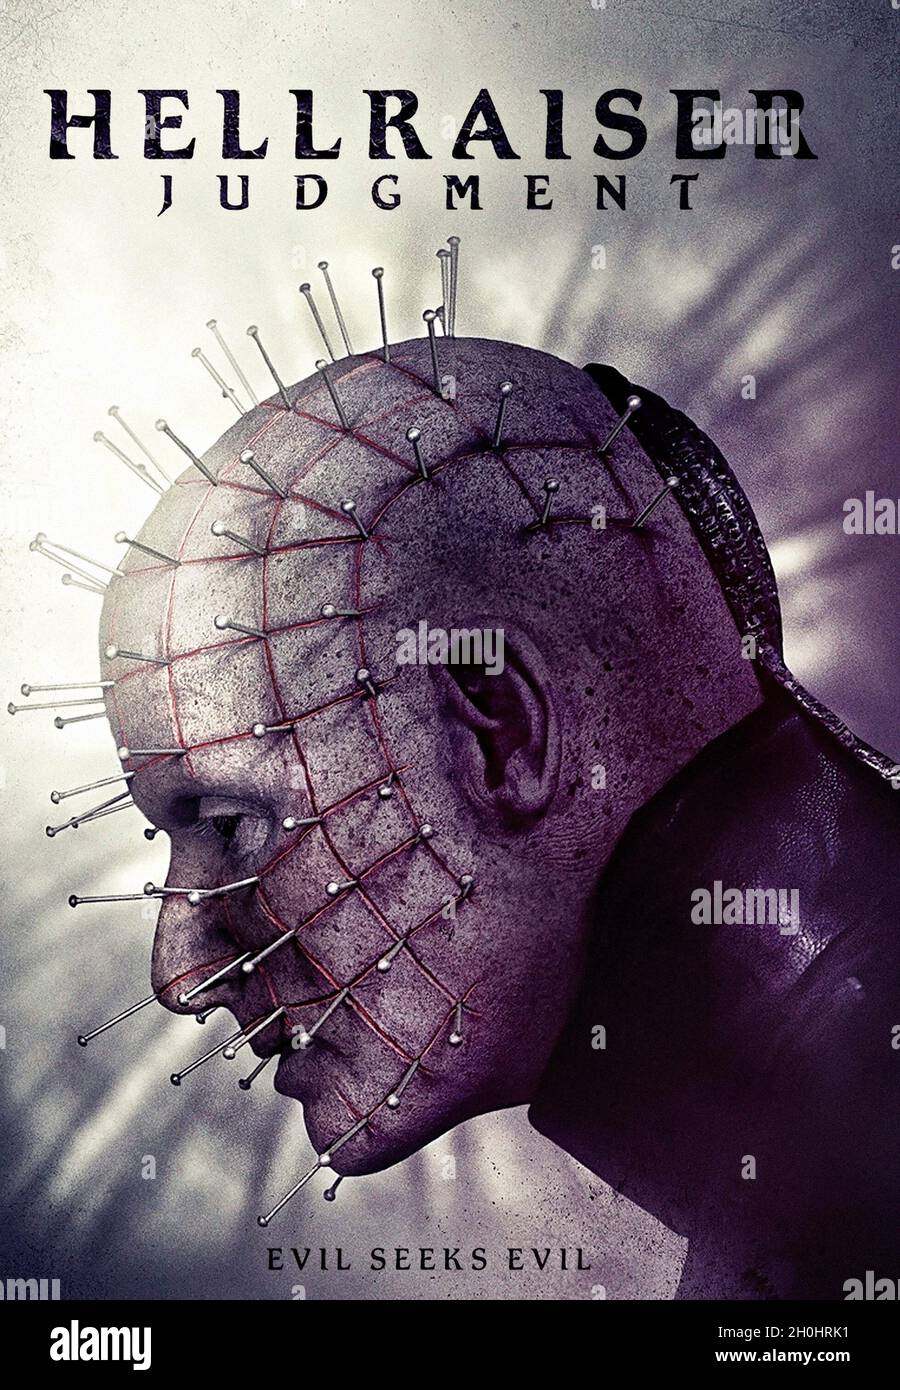 RELEASE DATE: February 3, 2018 TITLE: Hellraiser: Judgment STUDIO: Dimension Films DIRECTOR: Gary J. Tunnicliffe Clive Barker PLOT: Detectives Sean and David Carter are on the case to find a gruesome serial killer terrorizing the city. Joining forces with Detective Christine Egerton, they dig deeper into a spiraling maze of horror that may not be of this world. STARRING: Damon Carney, Randy Wayne, Alexandra Harris. (Credit Image: © Dimension Films/Entertainment Pictures) Stock Photo